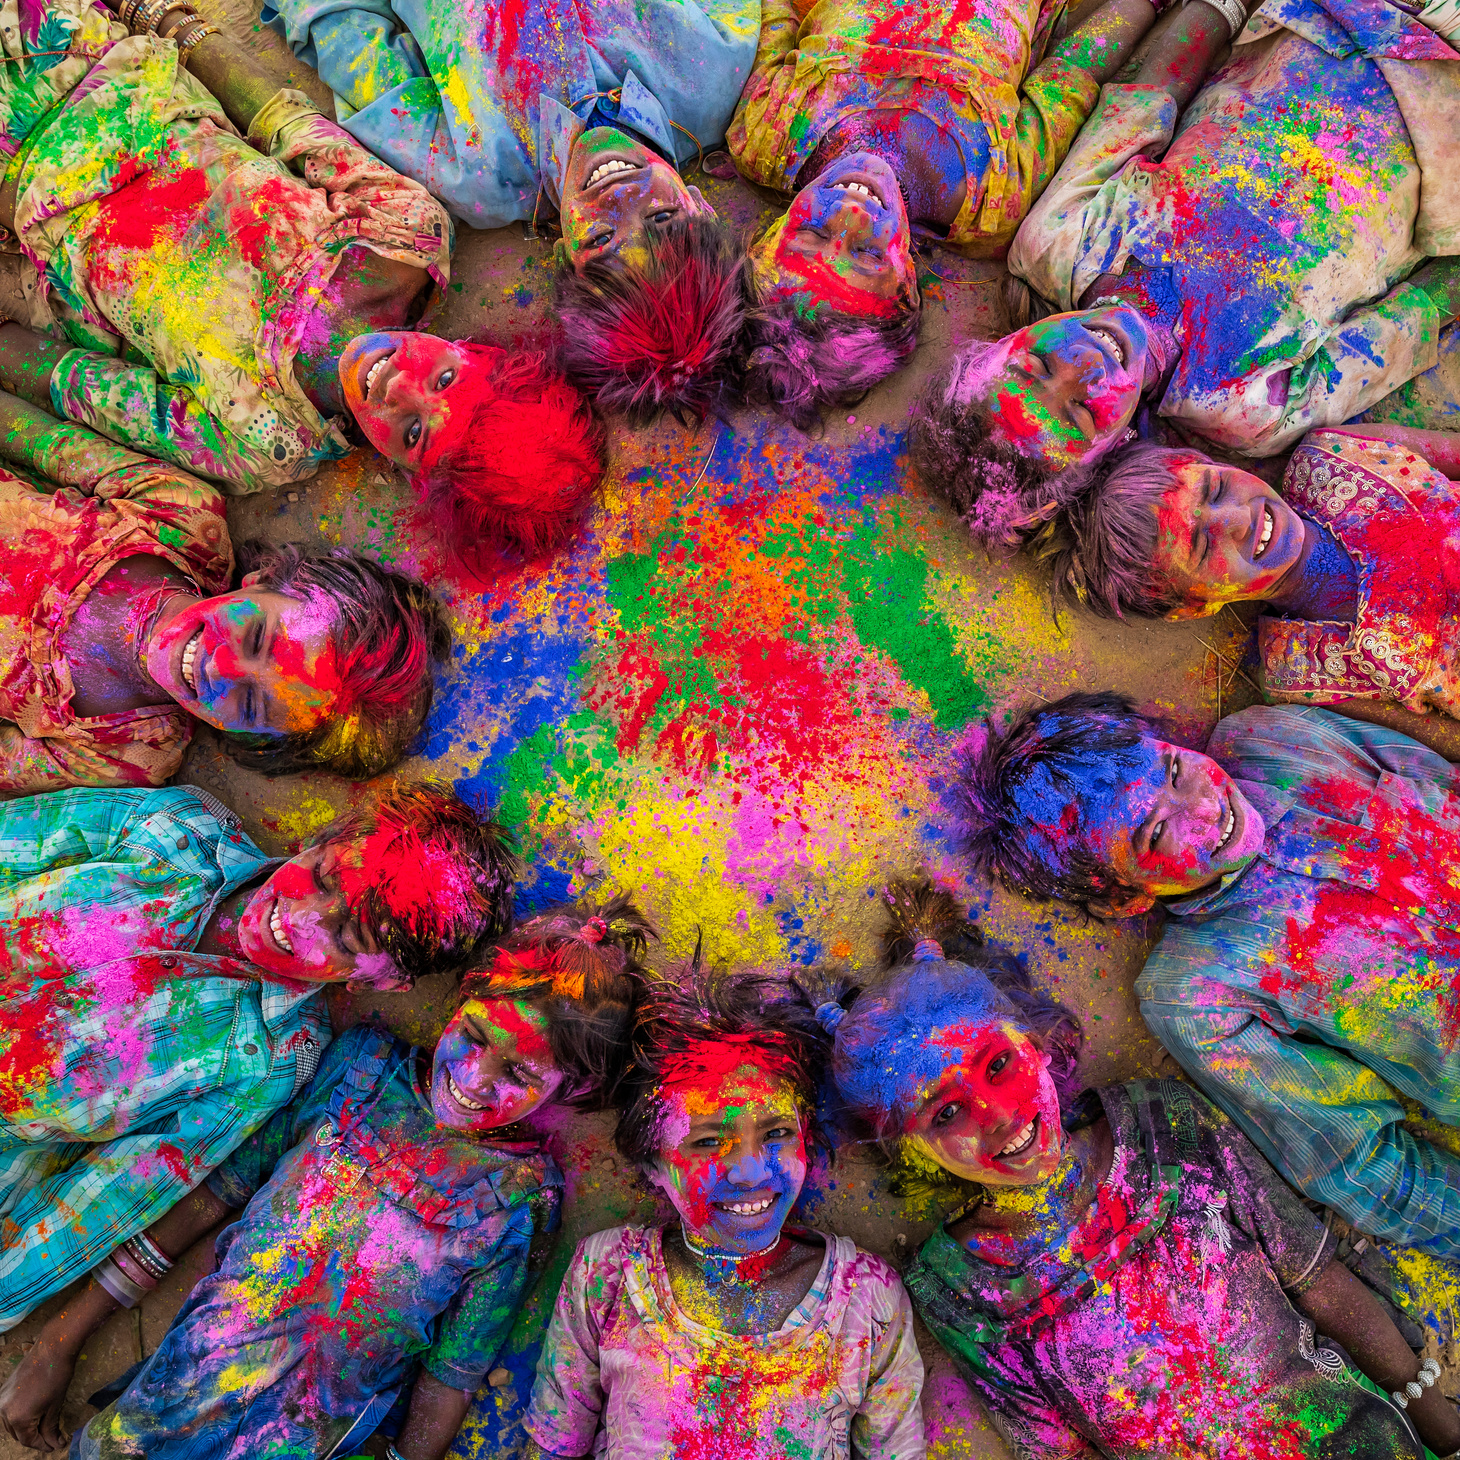 Group of happy Indian children playing holi, desert village, India